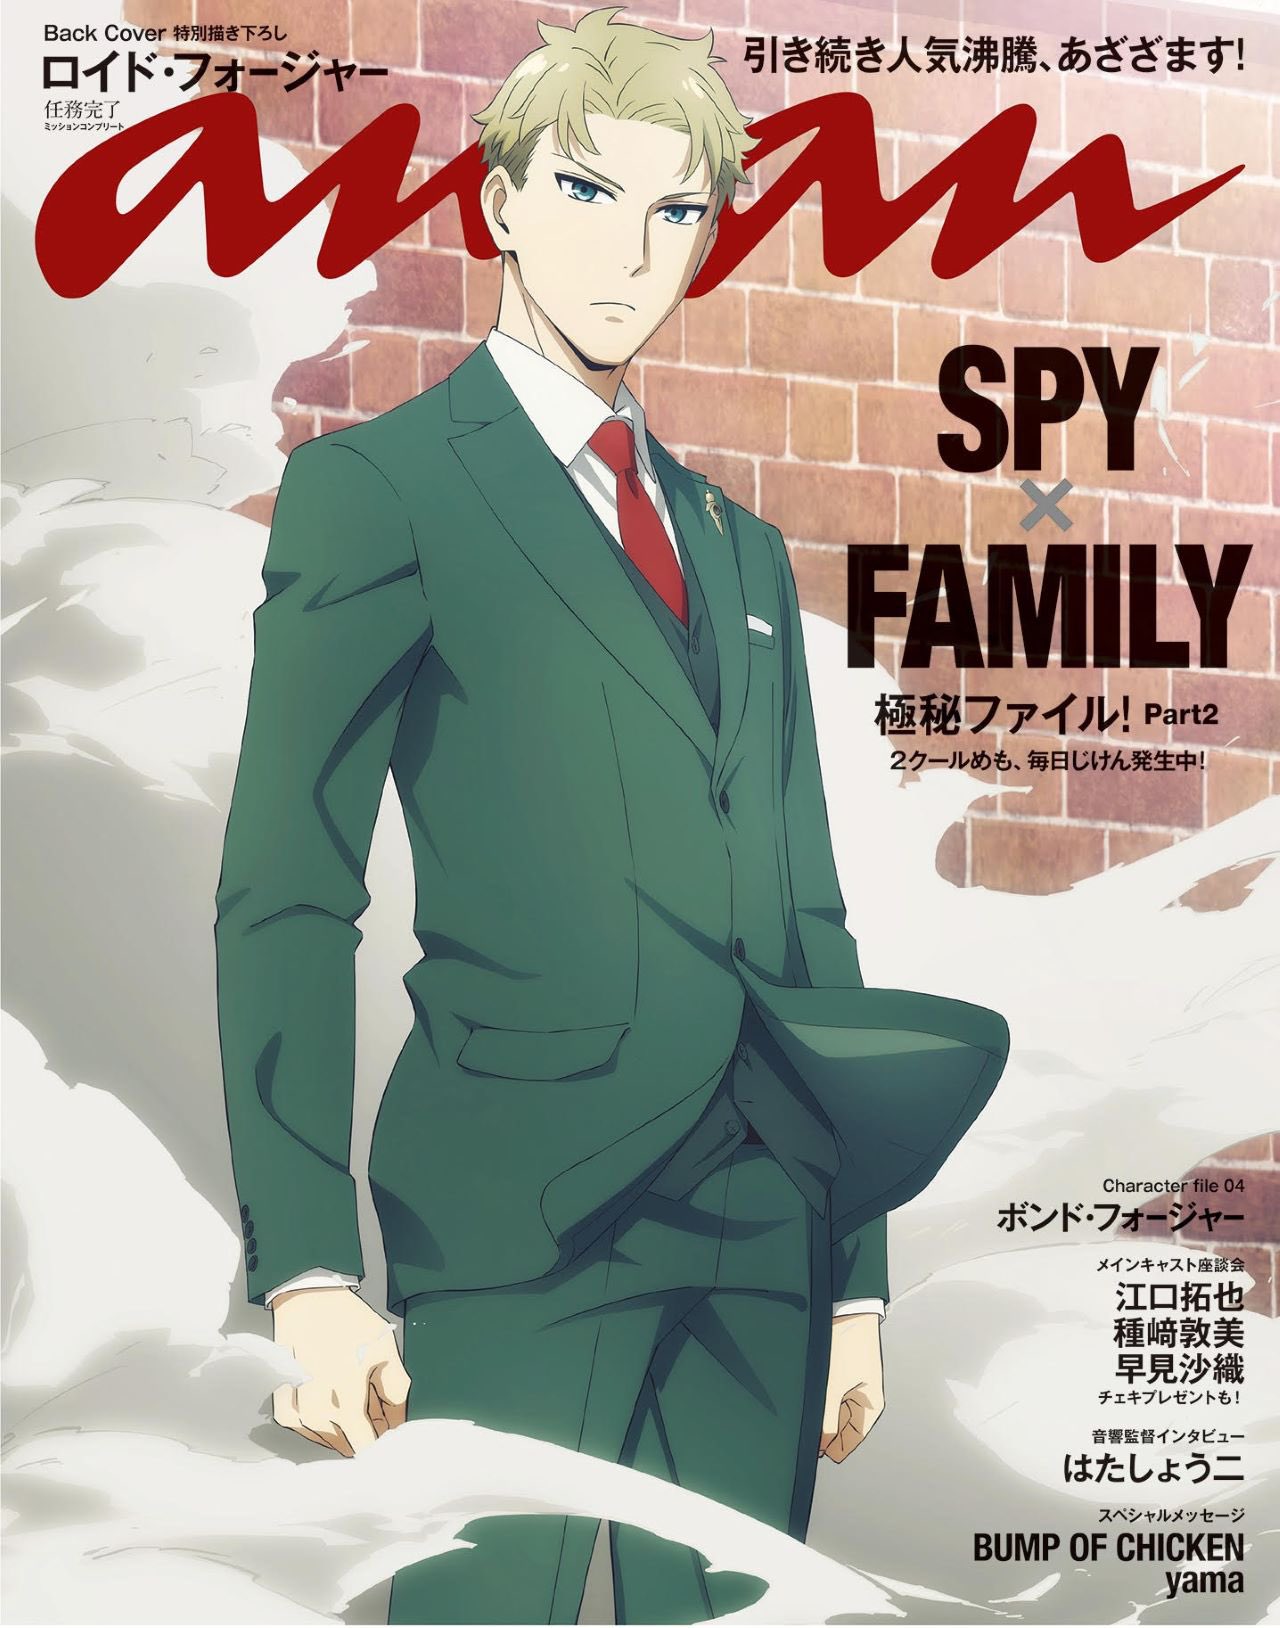 Japanese Weather Reporter's Spy x Family Cosplay as Yor Forger Receives  Over 160k Likes - Anime Corner